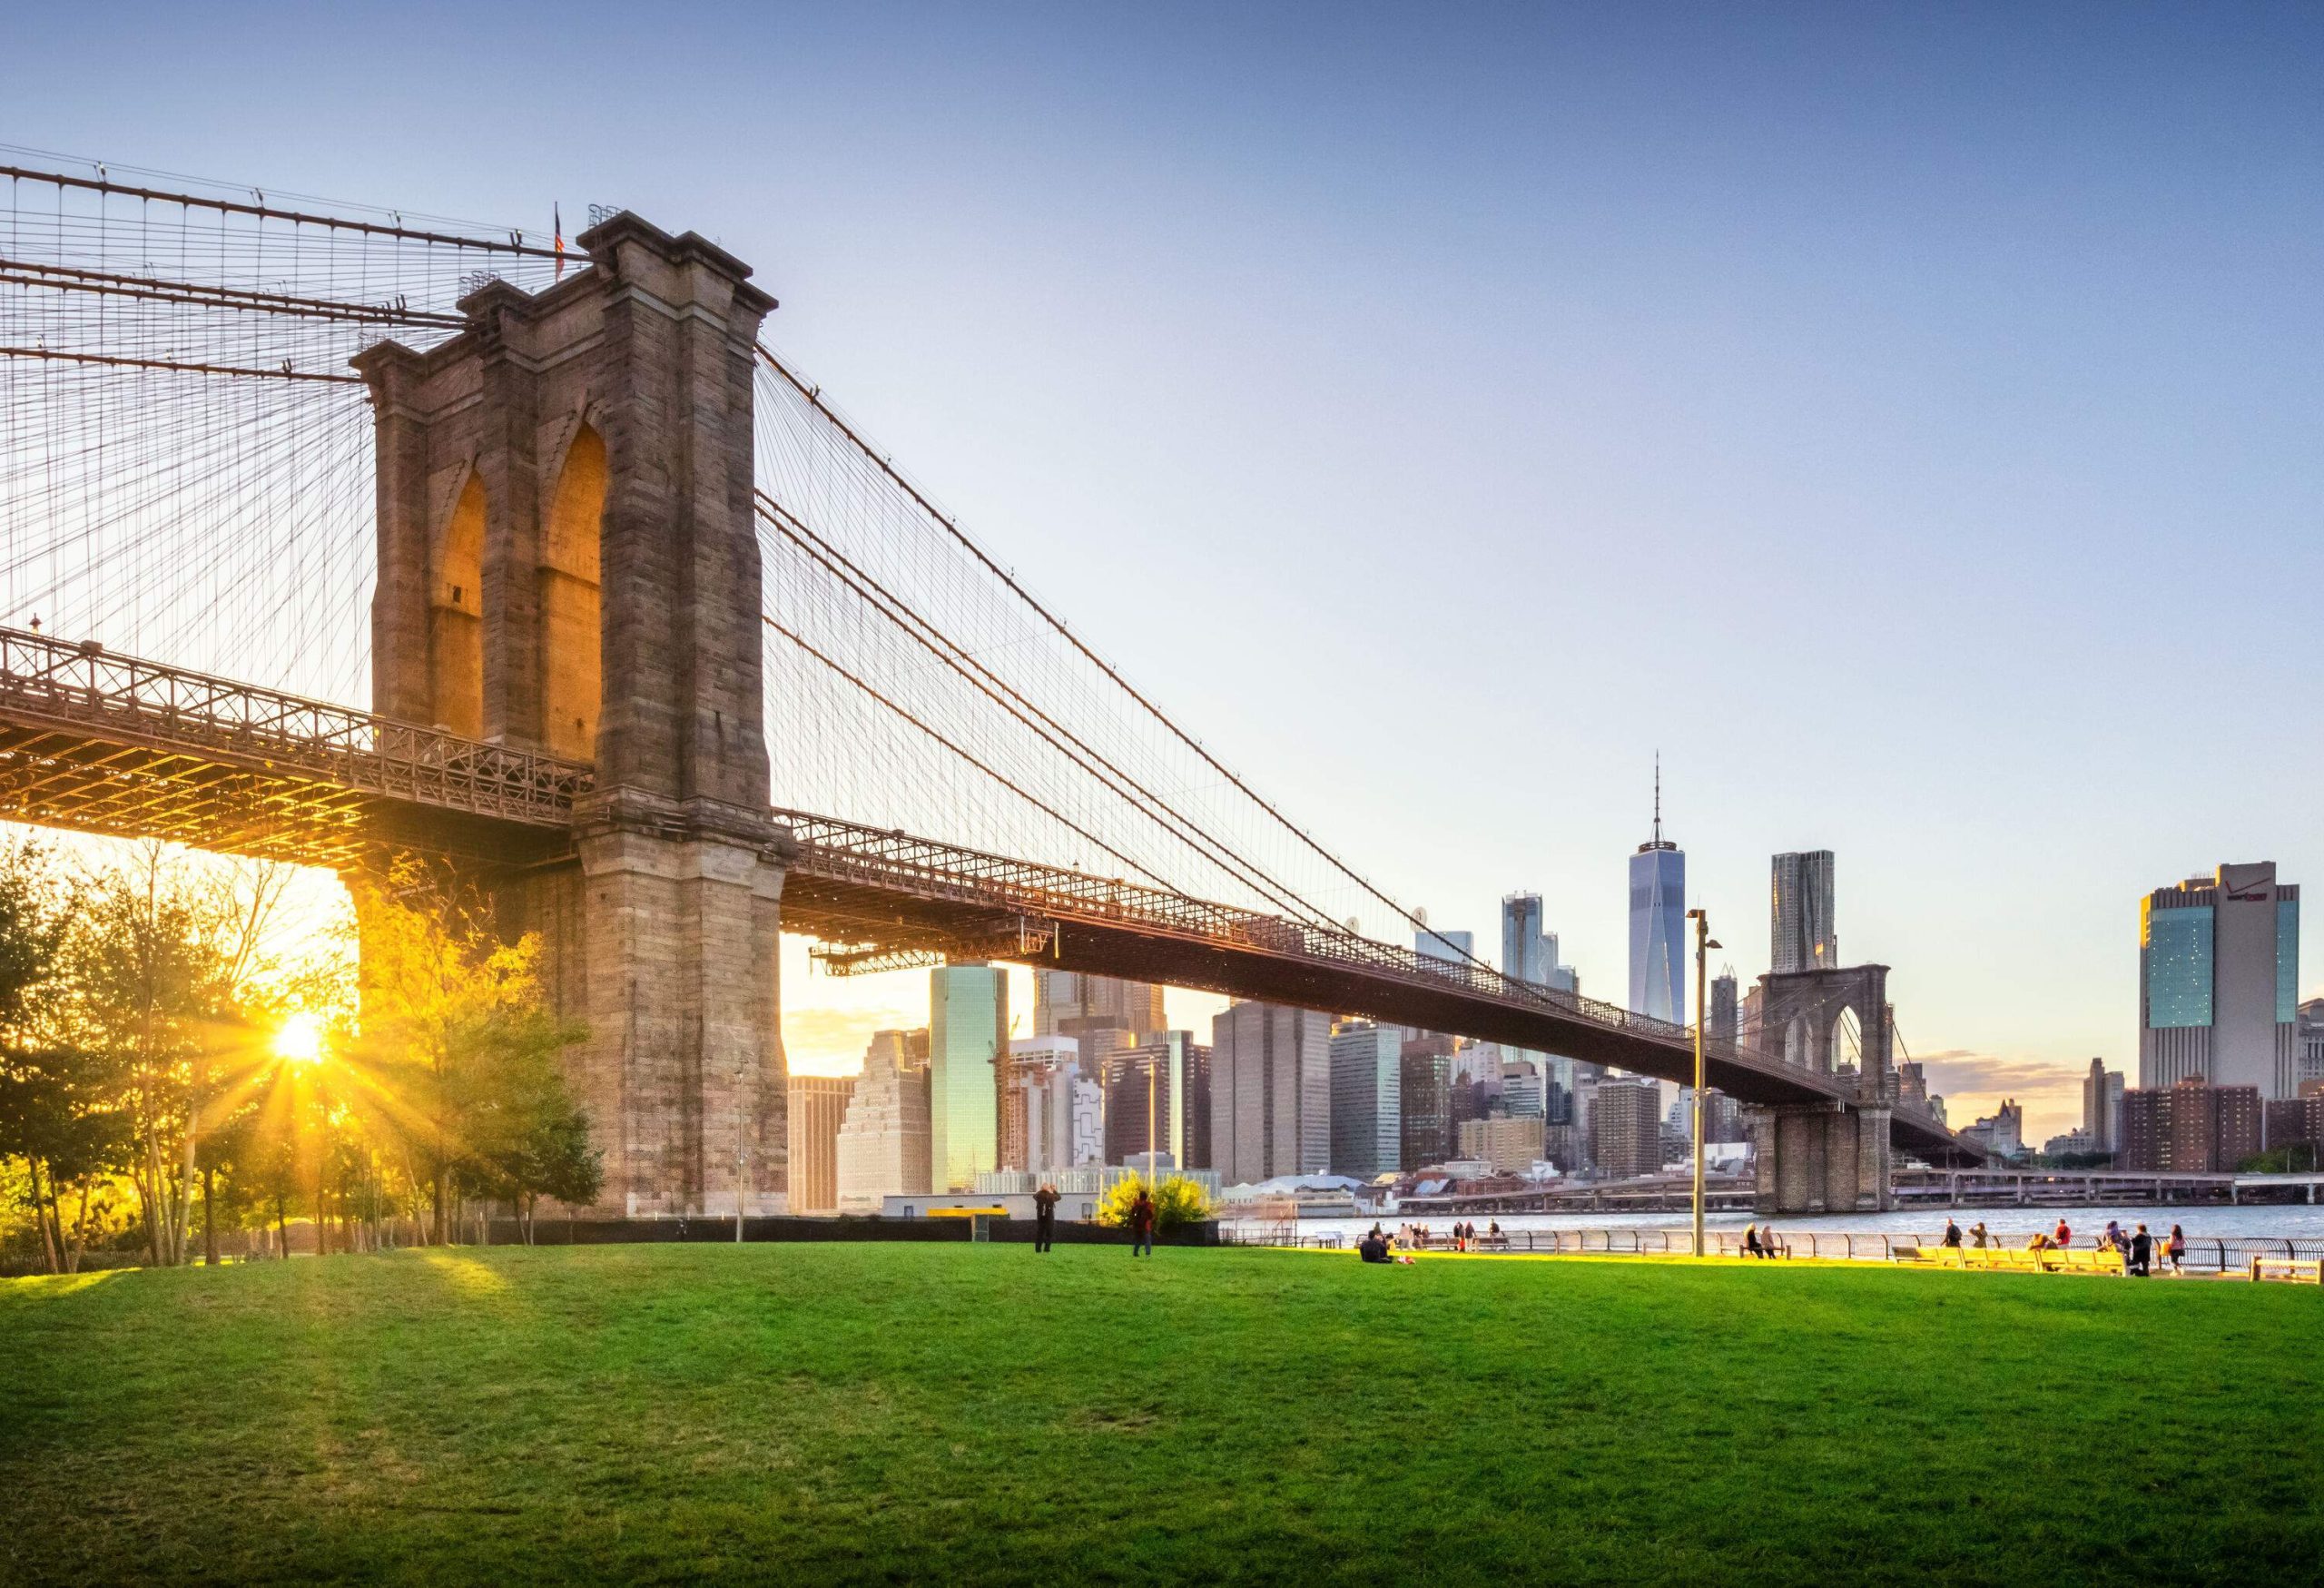 The long Brooklyn bridge spans the river between a grassy lawn and tall buildings.